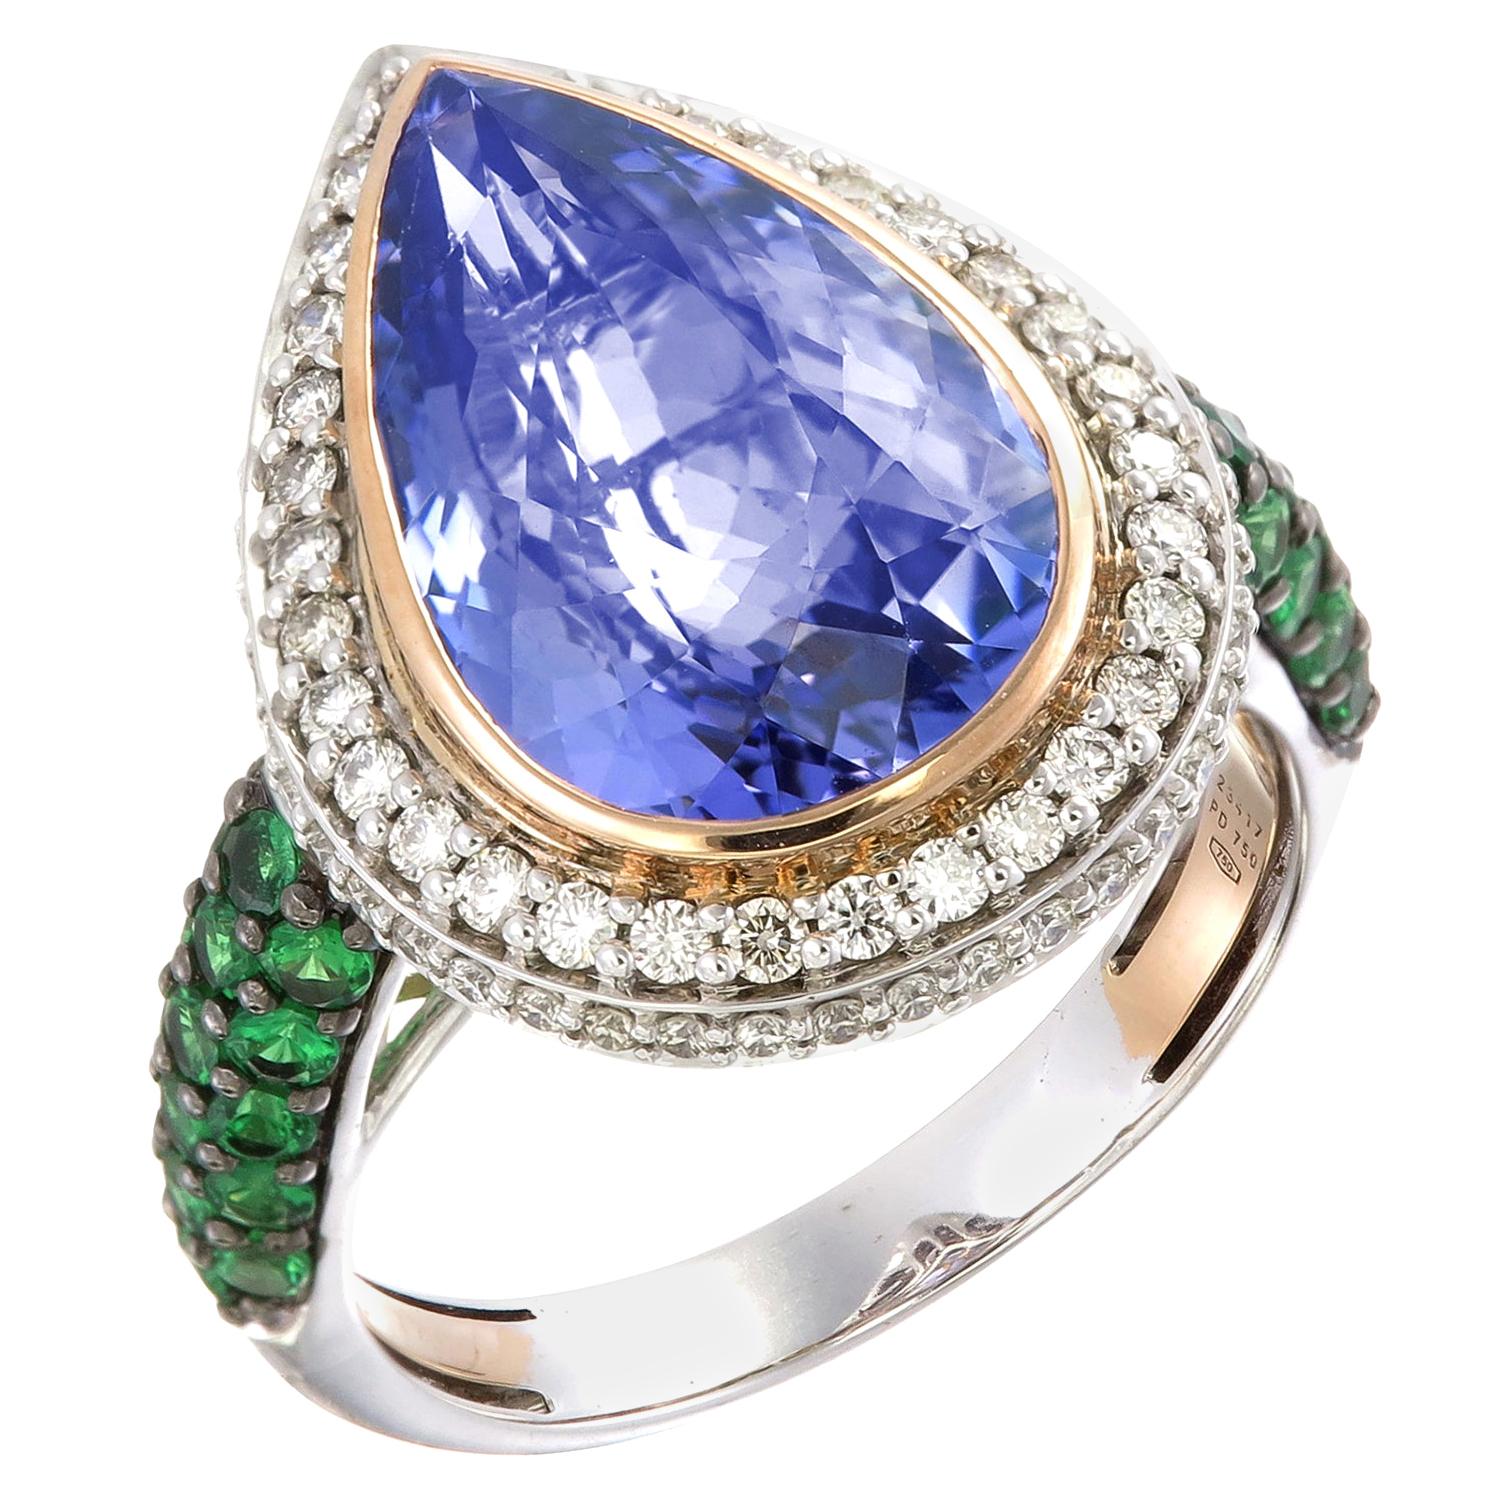 Zorab Creation-A Blue Teardrop 9.75-Tear-Shaped Translucent Tanzanite Ring For Sale